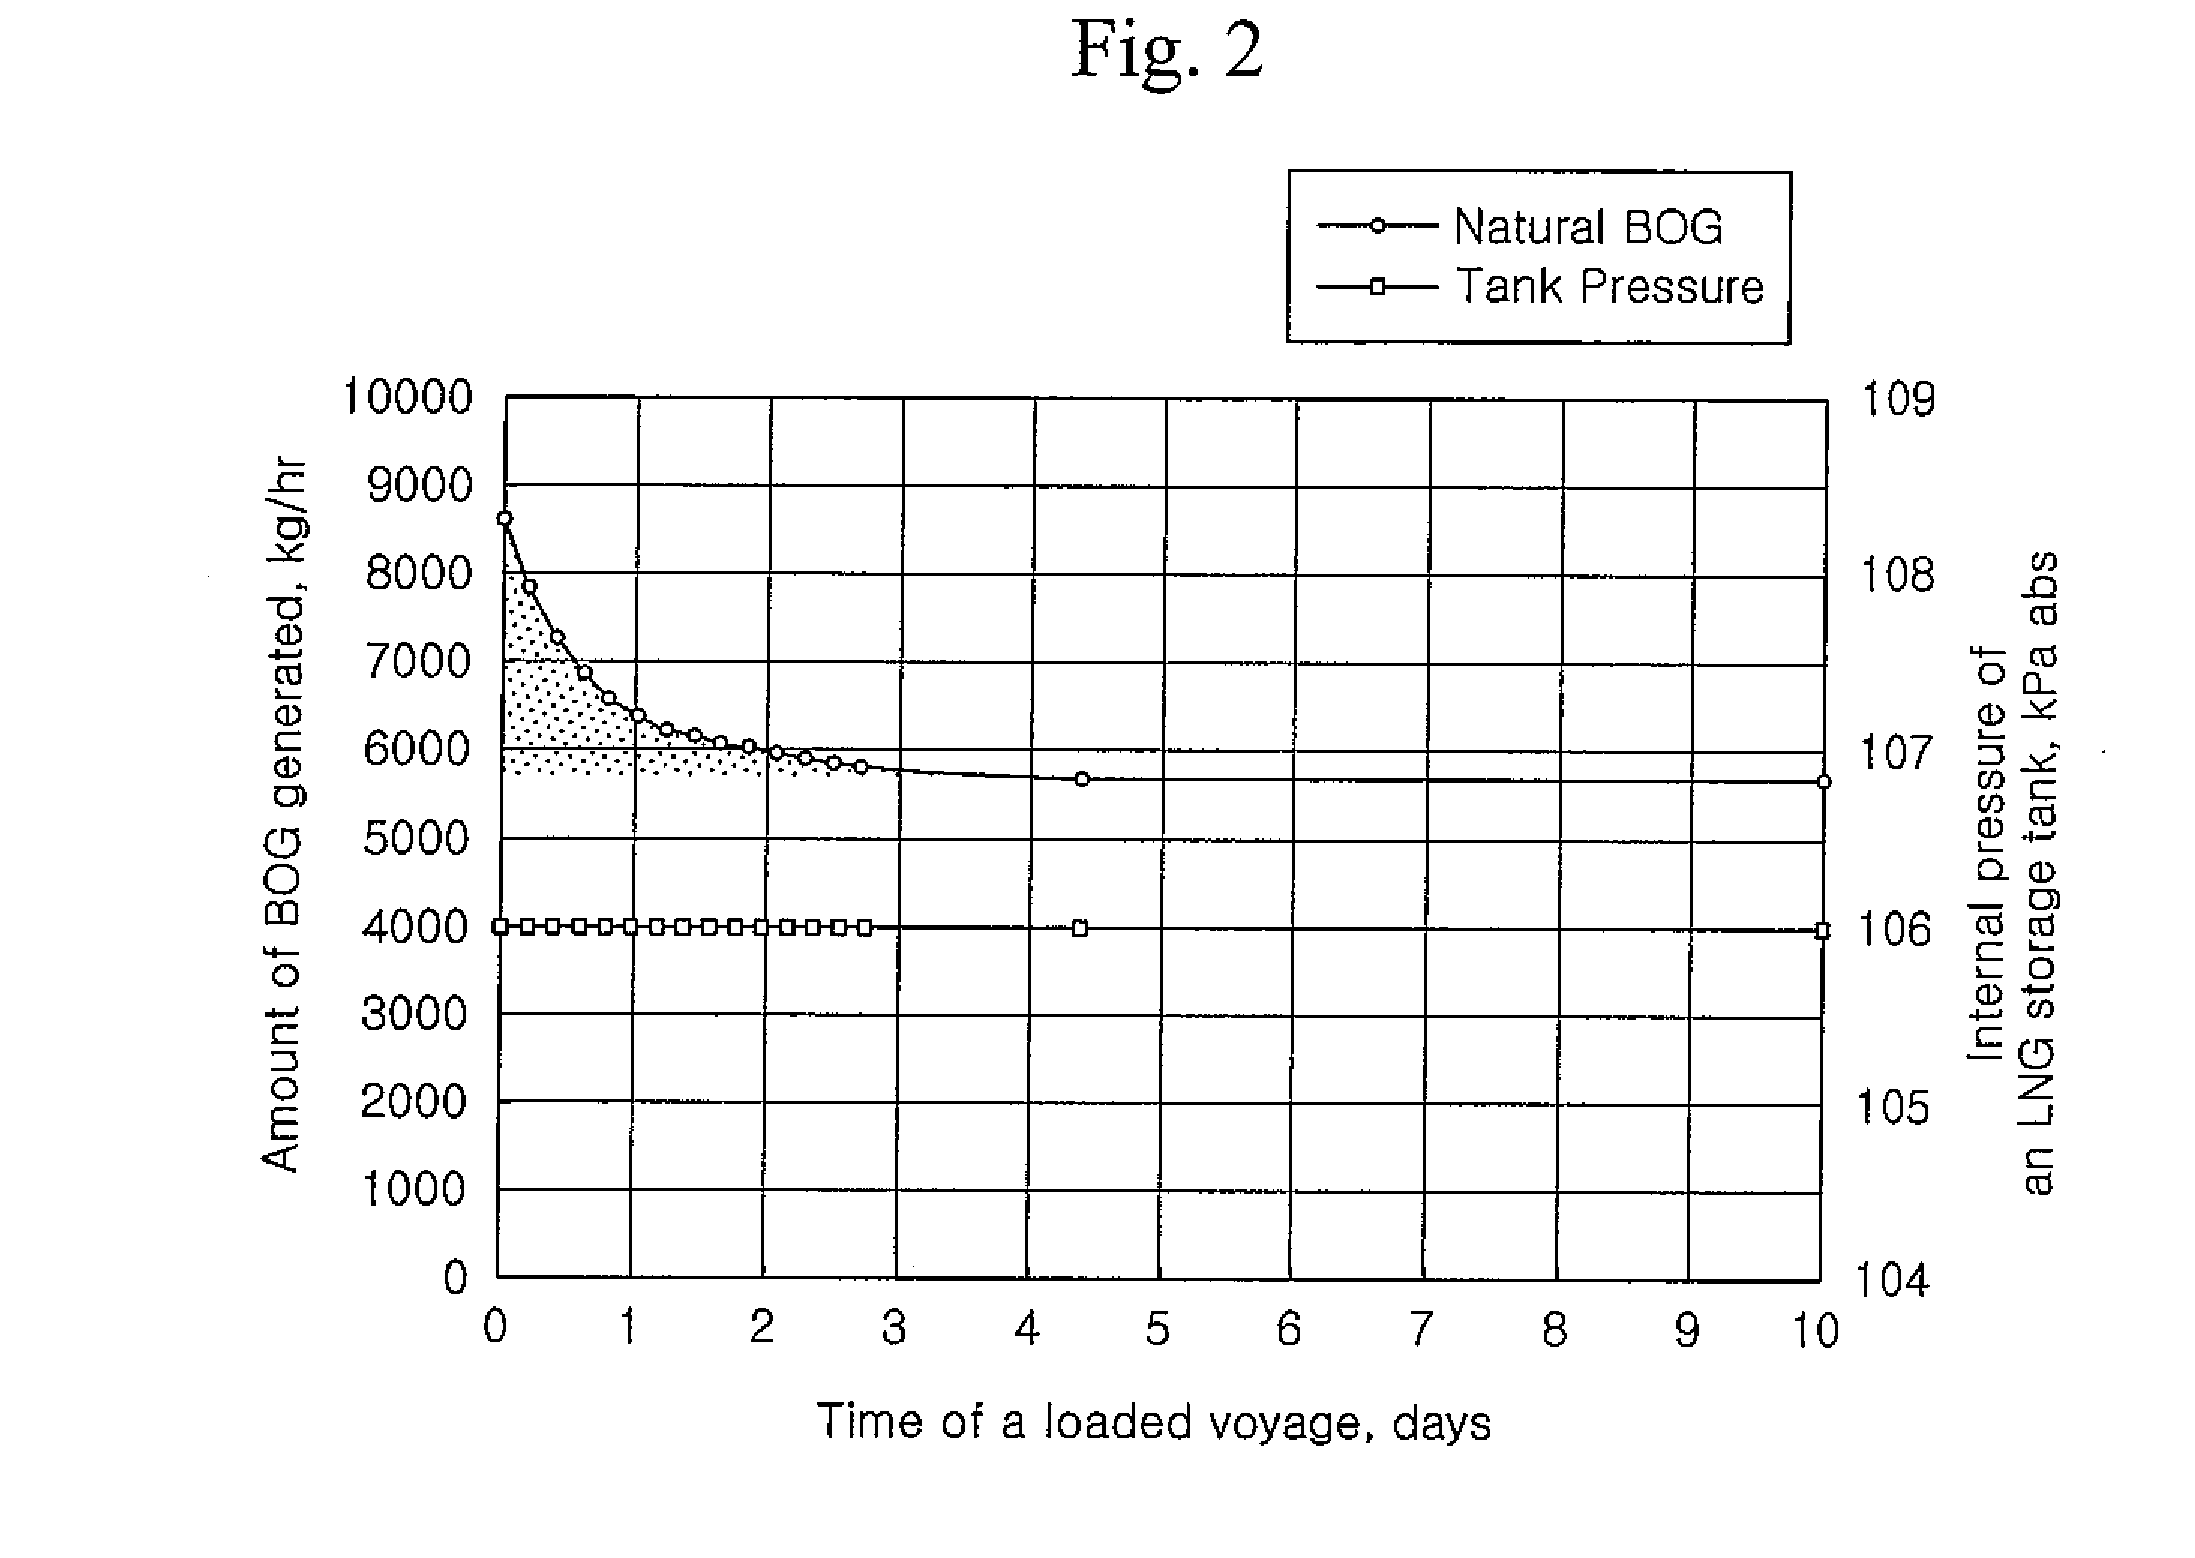 Method and Apparatus for Treating Boil-Off Gas in an LNG Carrier Having a Reliquefaction Plant, and LNG Carrier Having Said Apparatus for Treating Boil-Off Gas